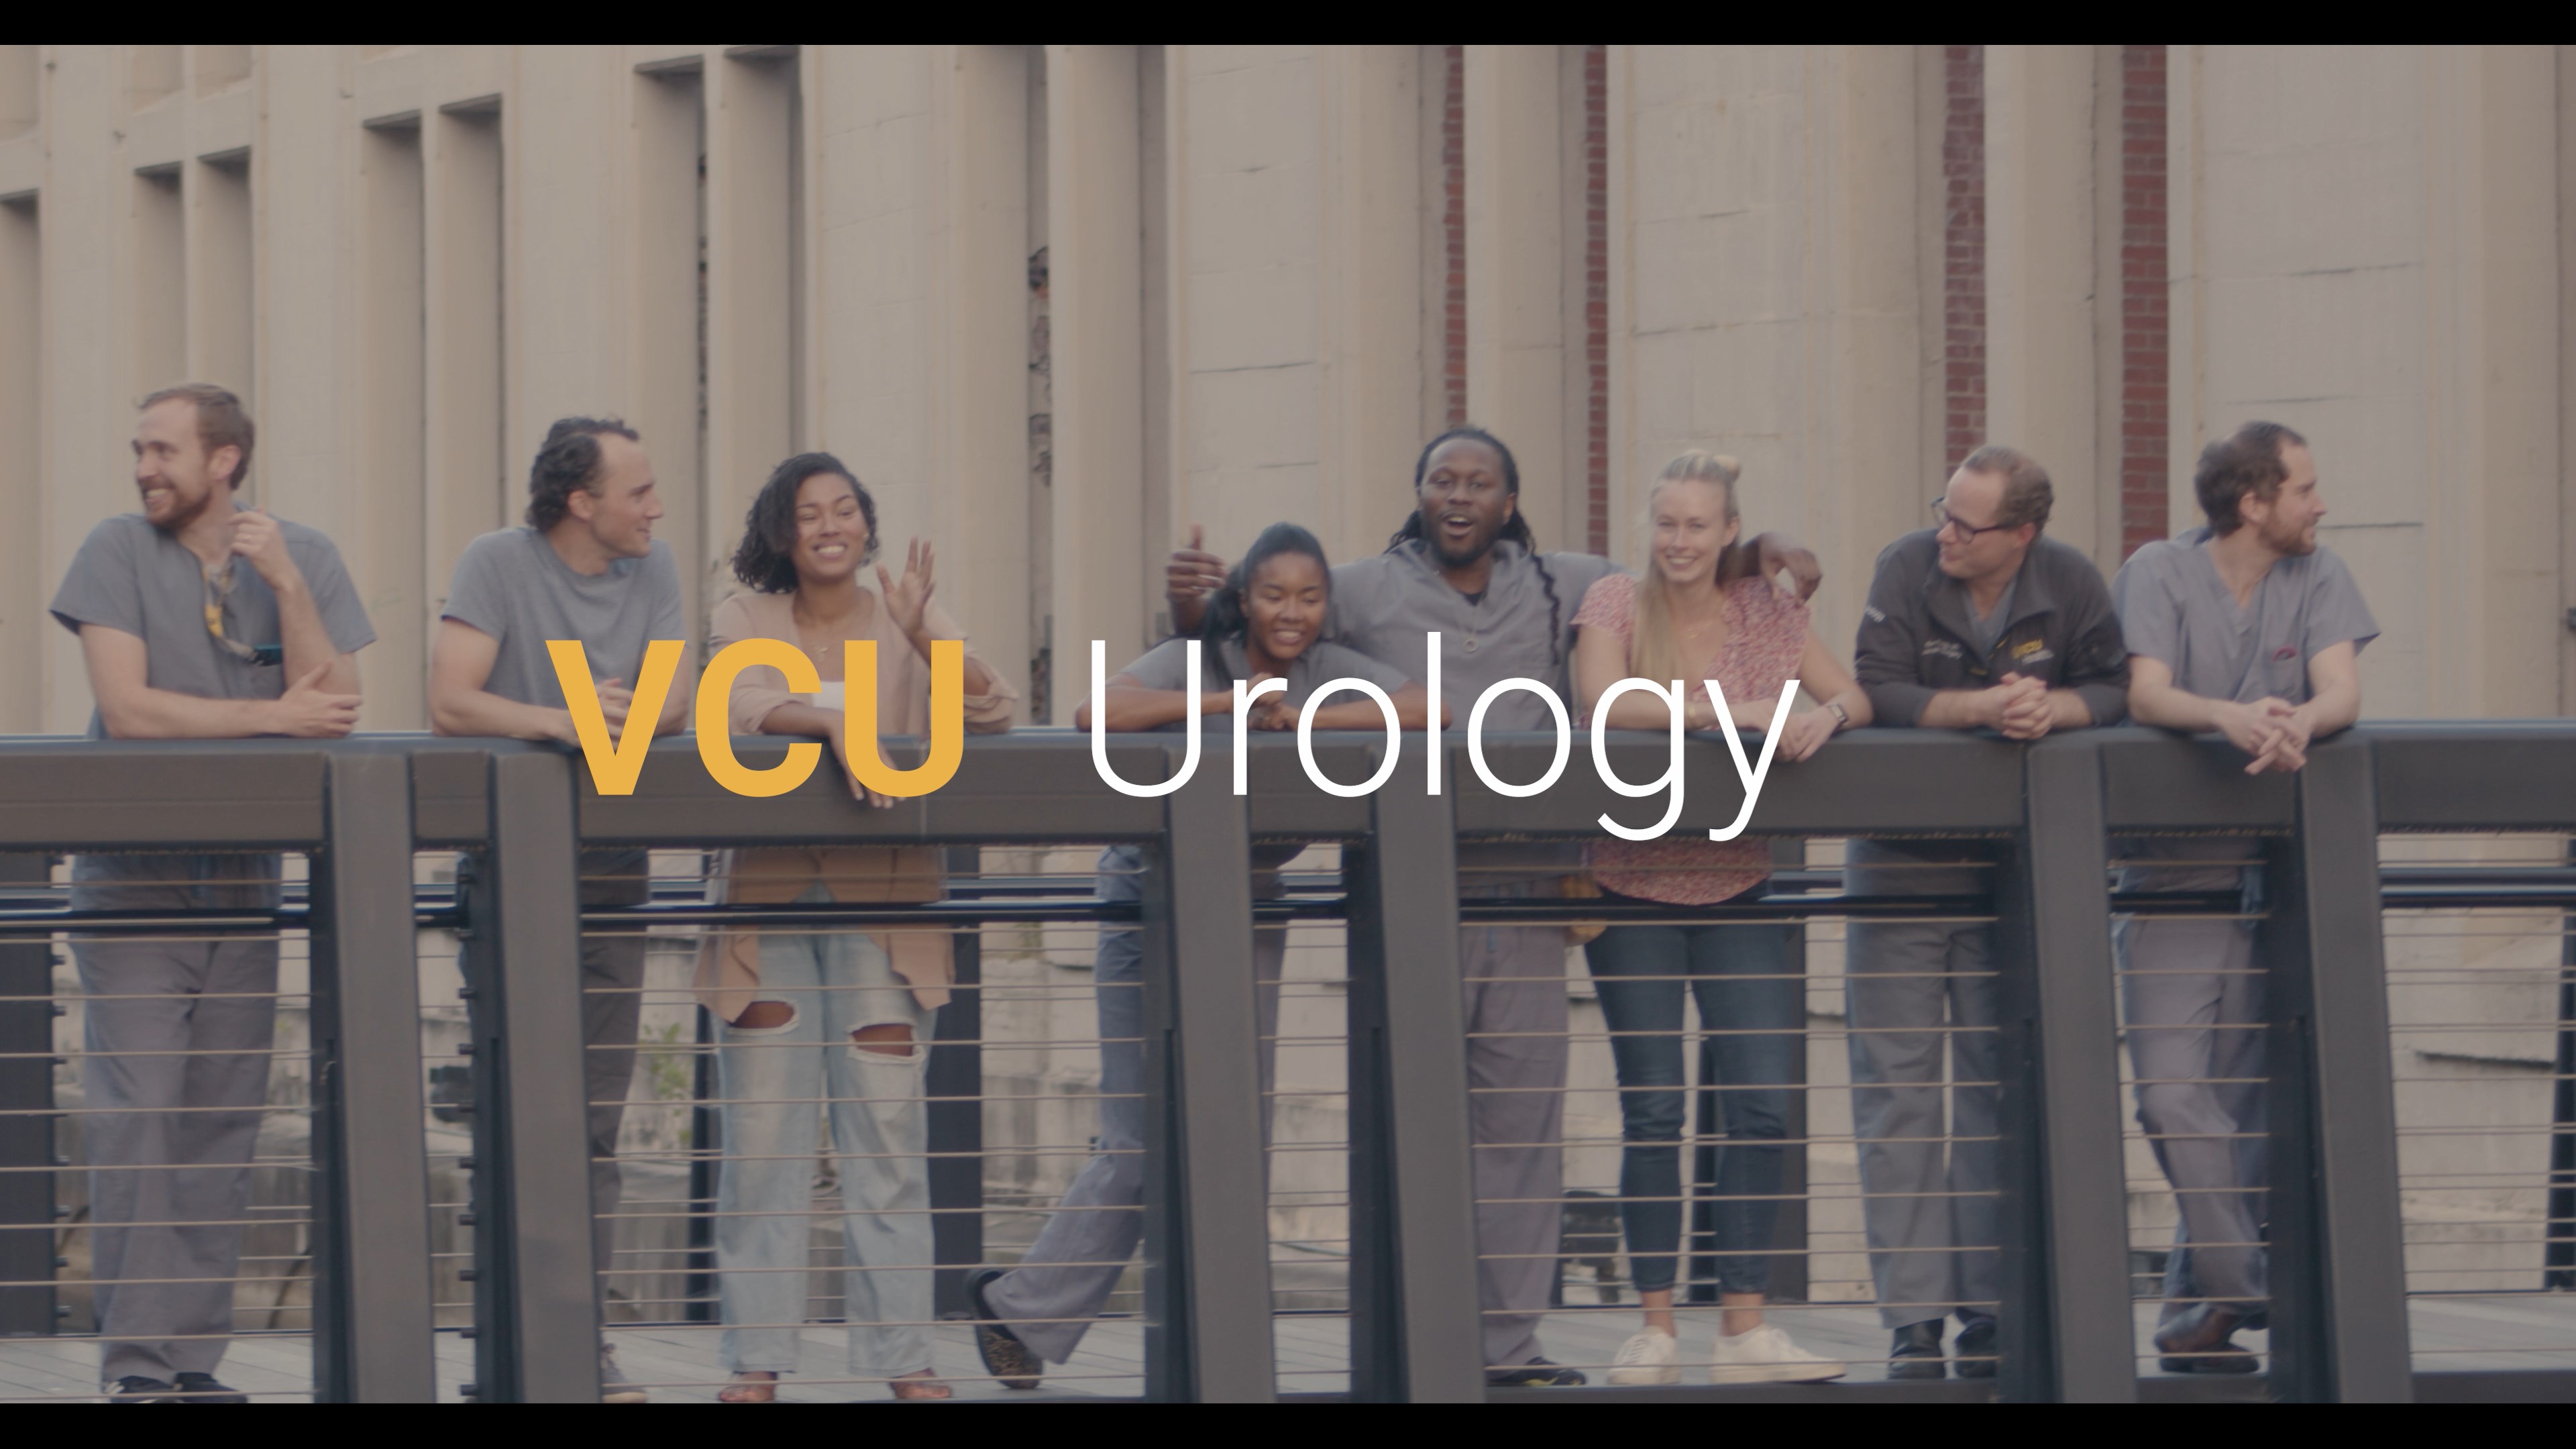 The VCU Resident Experience